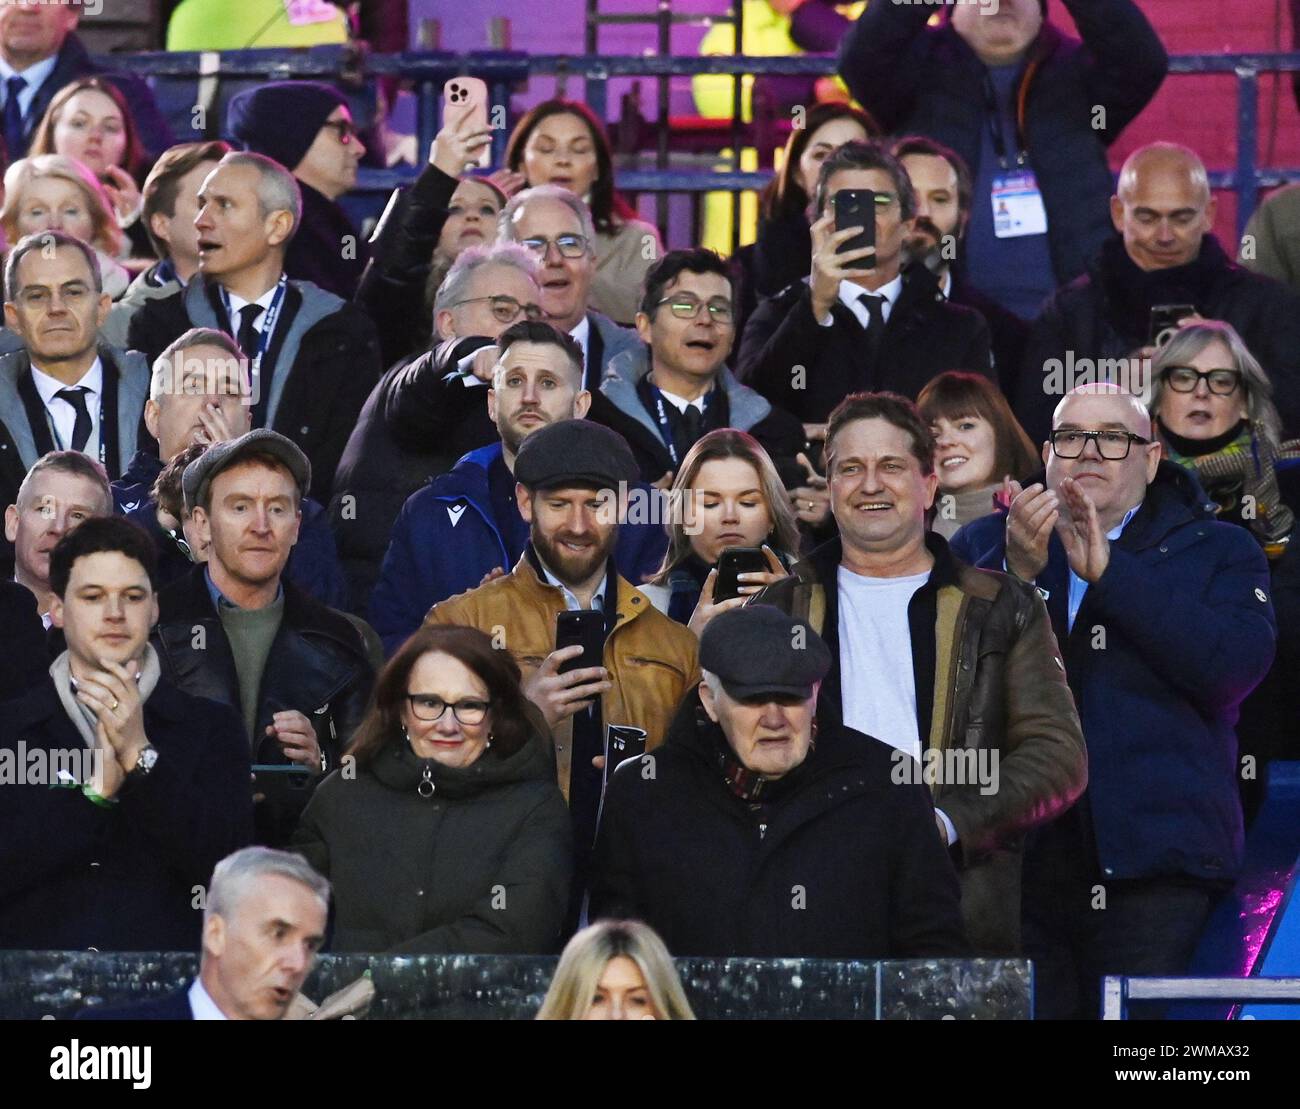 Scottish Gas Murrayfield Stadium. Edinburgh, UK. 24th Feb, 2024. UK.The Mens Guinness Six Nations match Scotland vs England Hollywood star Scottish actor Gerard Butler (White Tee Shirt) watching Scotland-England rugby match as he takes break from filming in Northern Ireland . Credit: eric mccowat/Alamy Live News Stock Photo